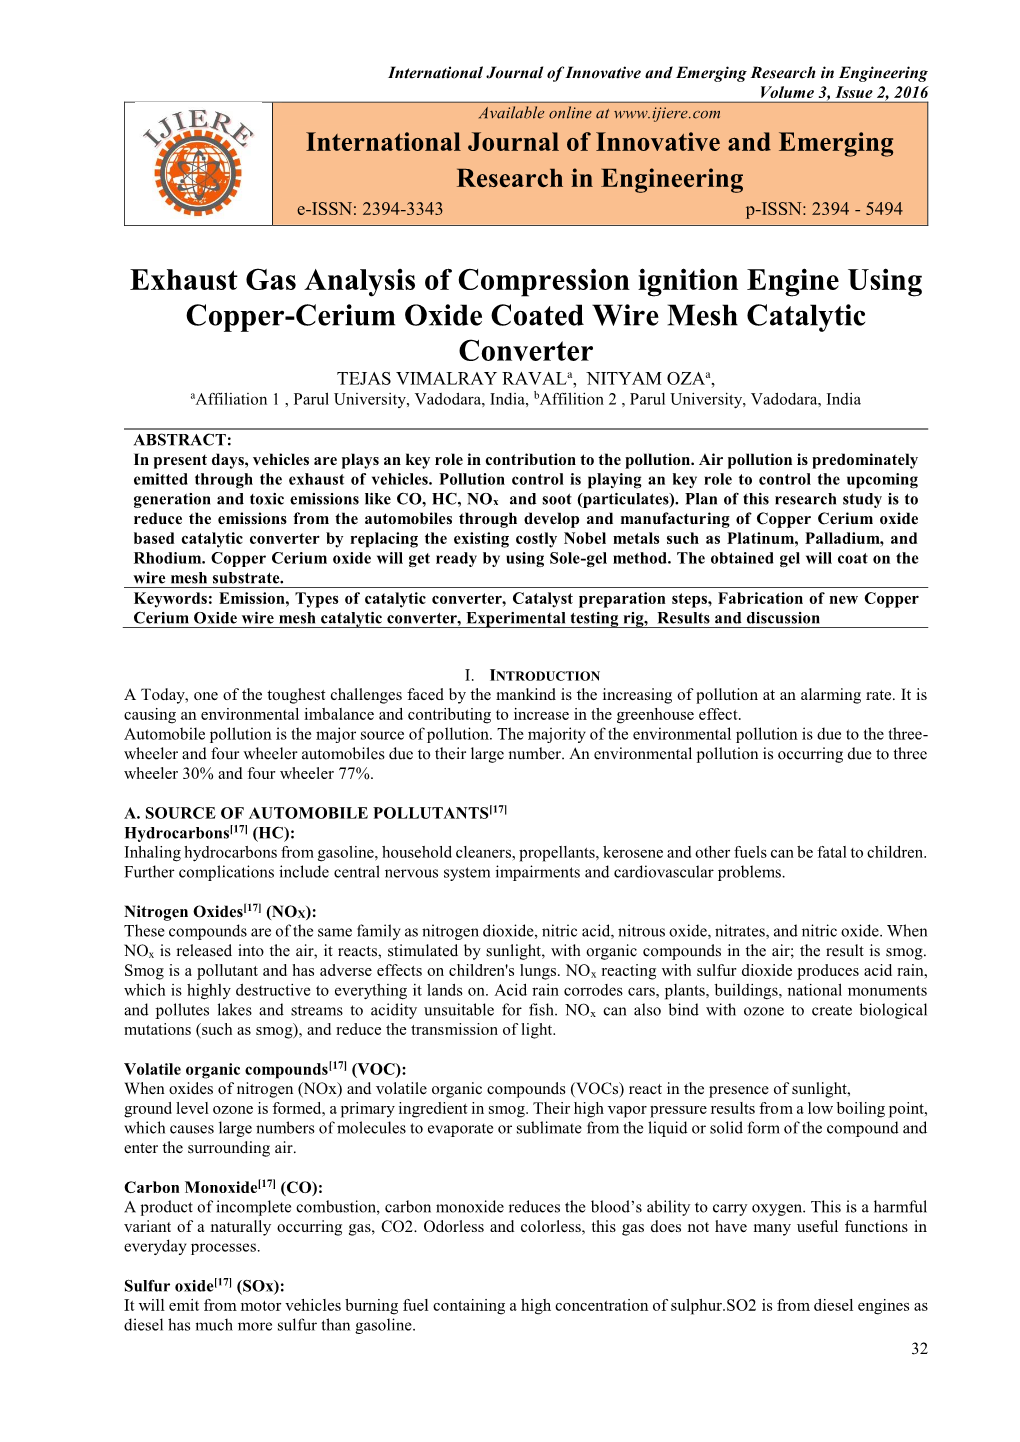 Exhaust Gas Analysis of Compression Ignition Engine Using Copper